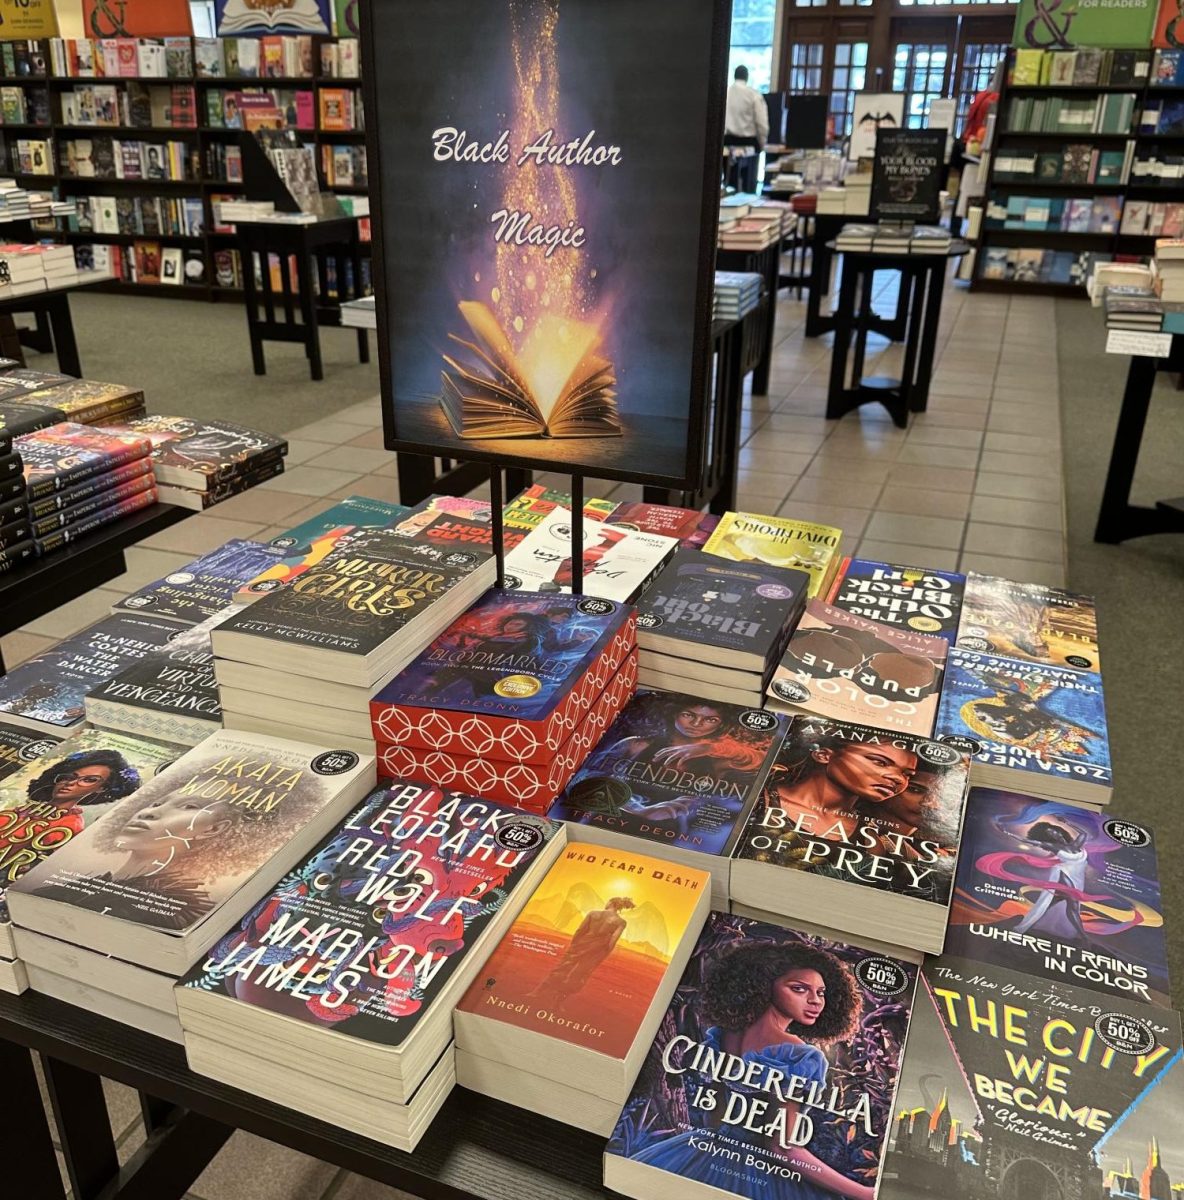 This table titled, “Black Author Magic,” features fantasy books written by Black authors, featuring Black characters. This table draws in readers with popular titles, like Legendborn by Tracy Deonn, and hopefully engages them to stay and browse the rest of the table. 